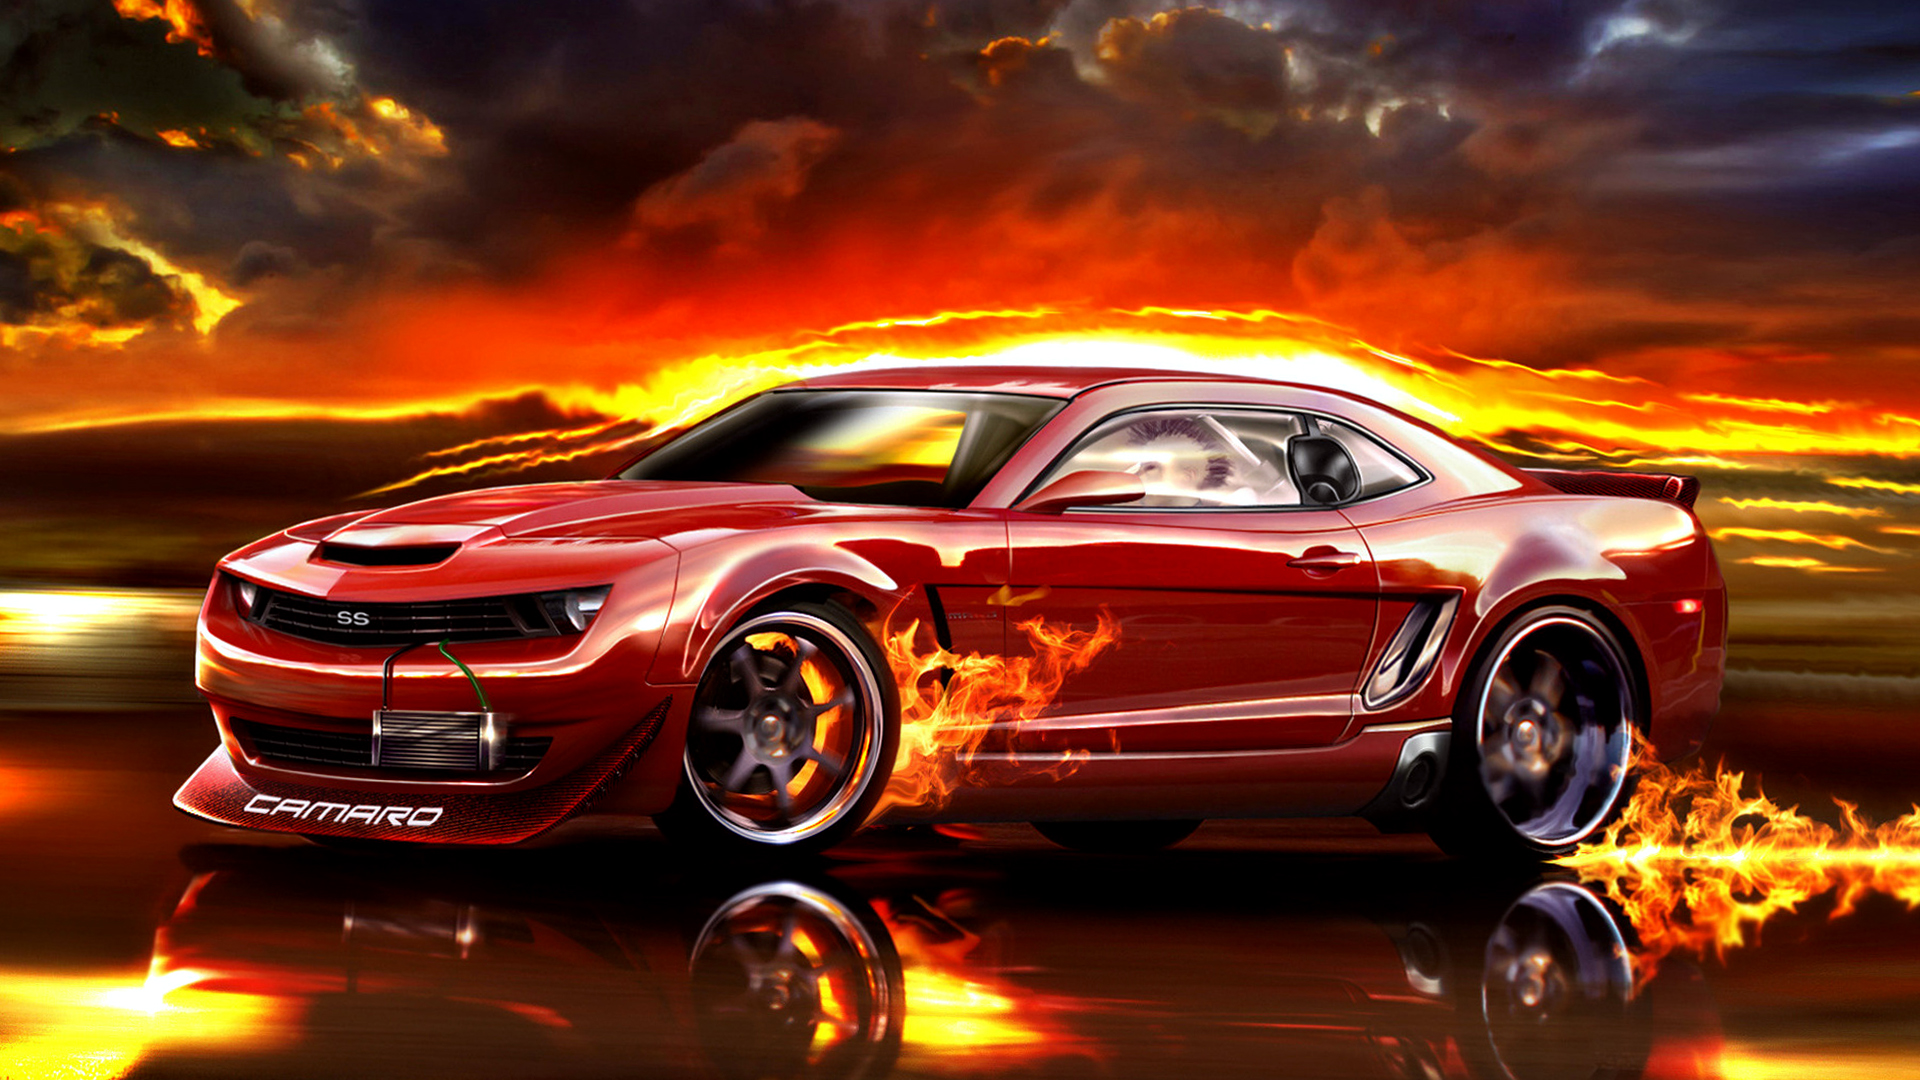 Red Chevrolet Camaro Fire Wallpapers HD / Desktop and Mobile Backgrounds